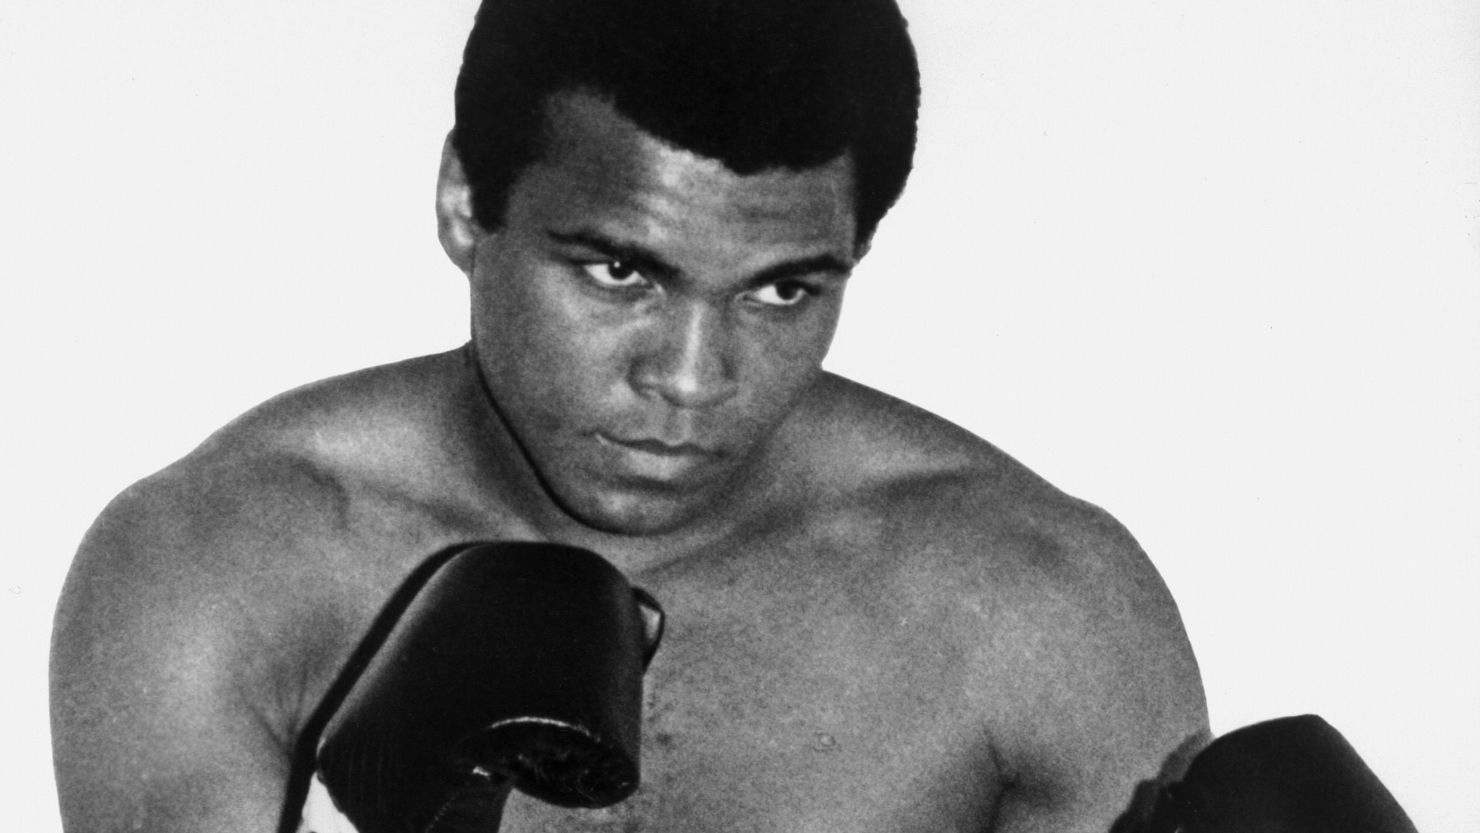 From global leaders to top athletes, the world paused to remember boxing legend Muhammad Ali.